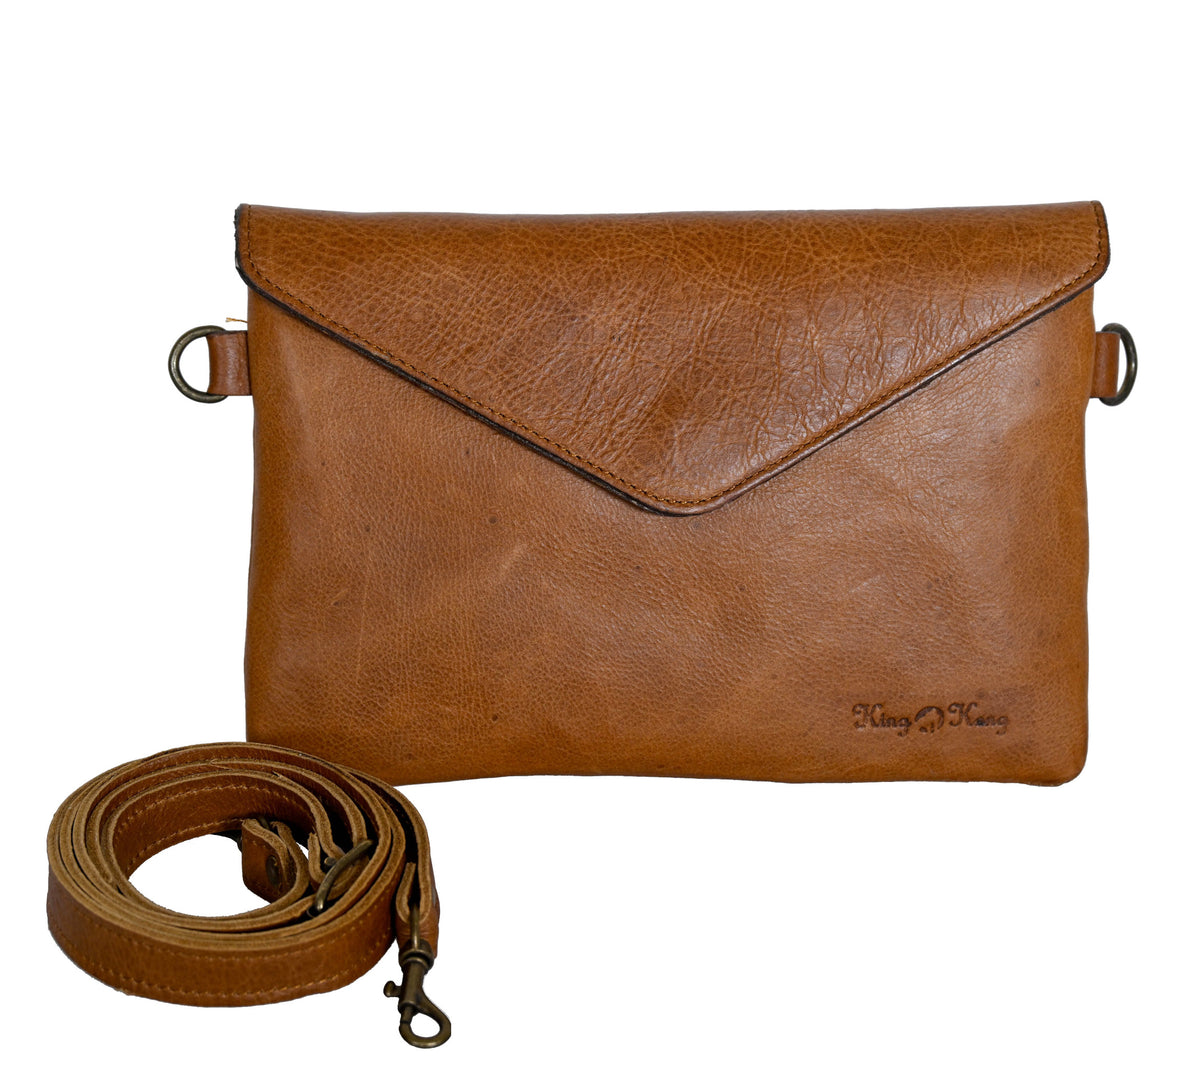 A5 Envelope Clutch Leather Sling